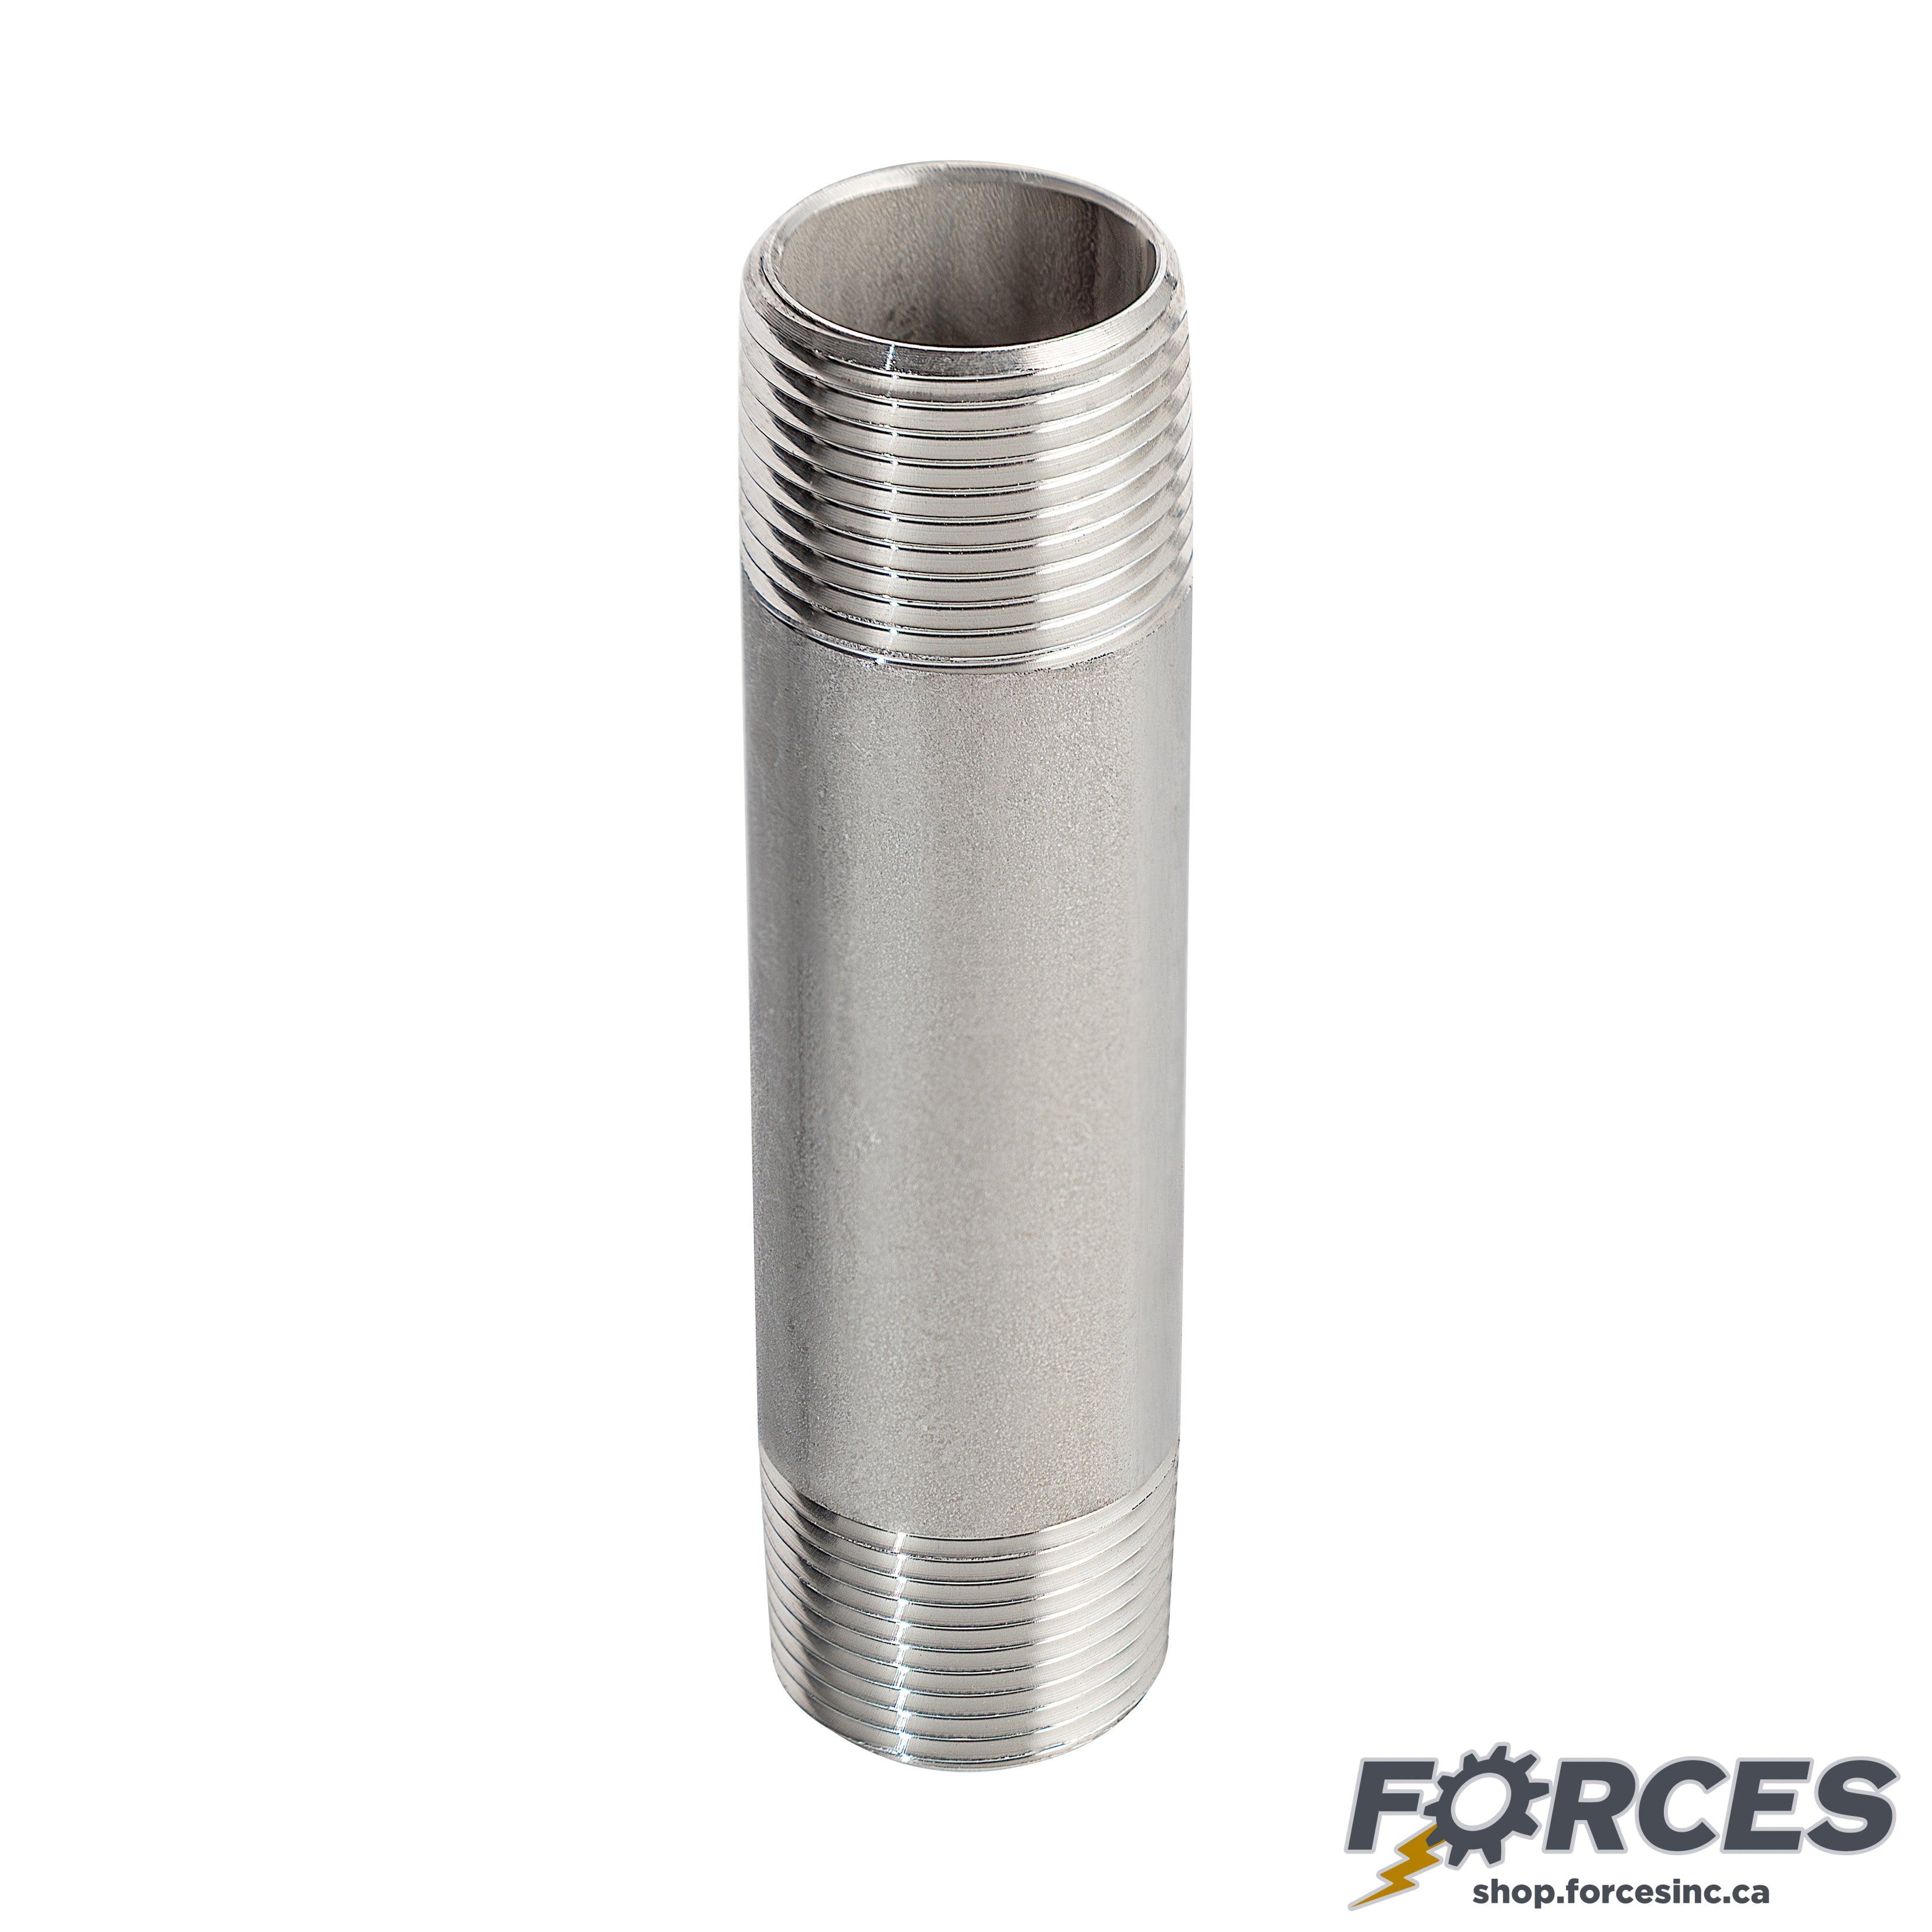 1/8" X 2" Long Nipple - Stainless Steel 316 - Forces Inc